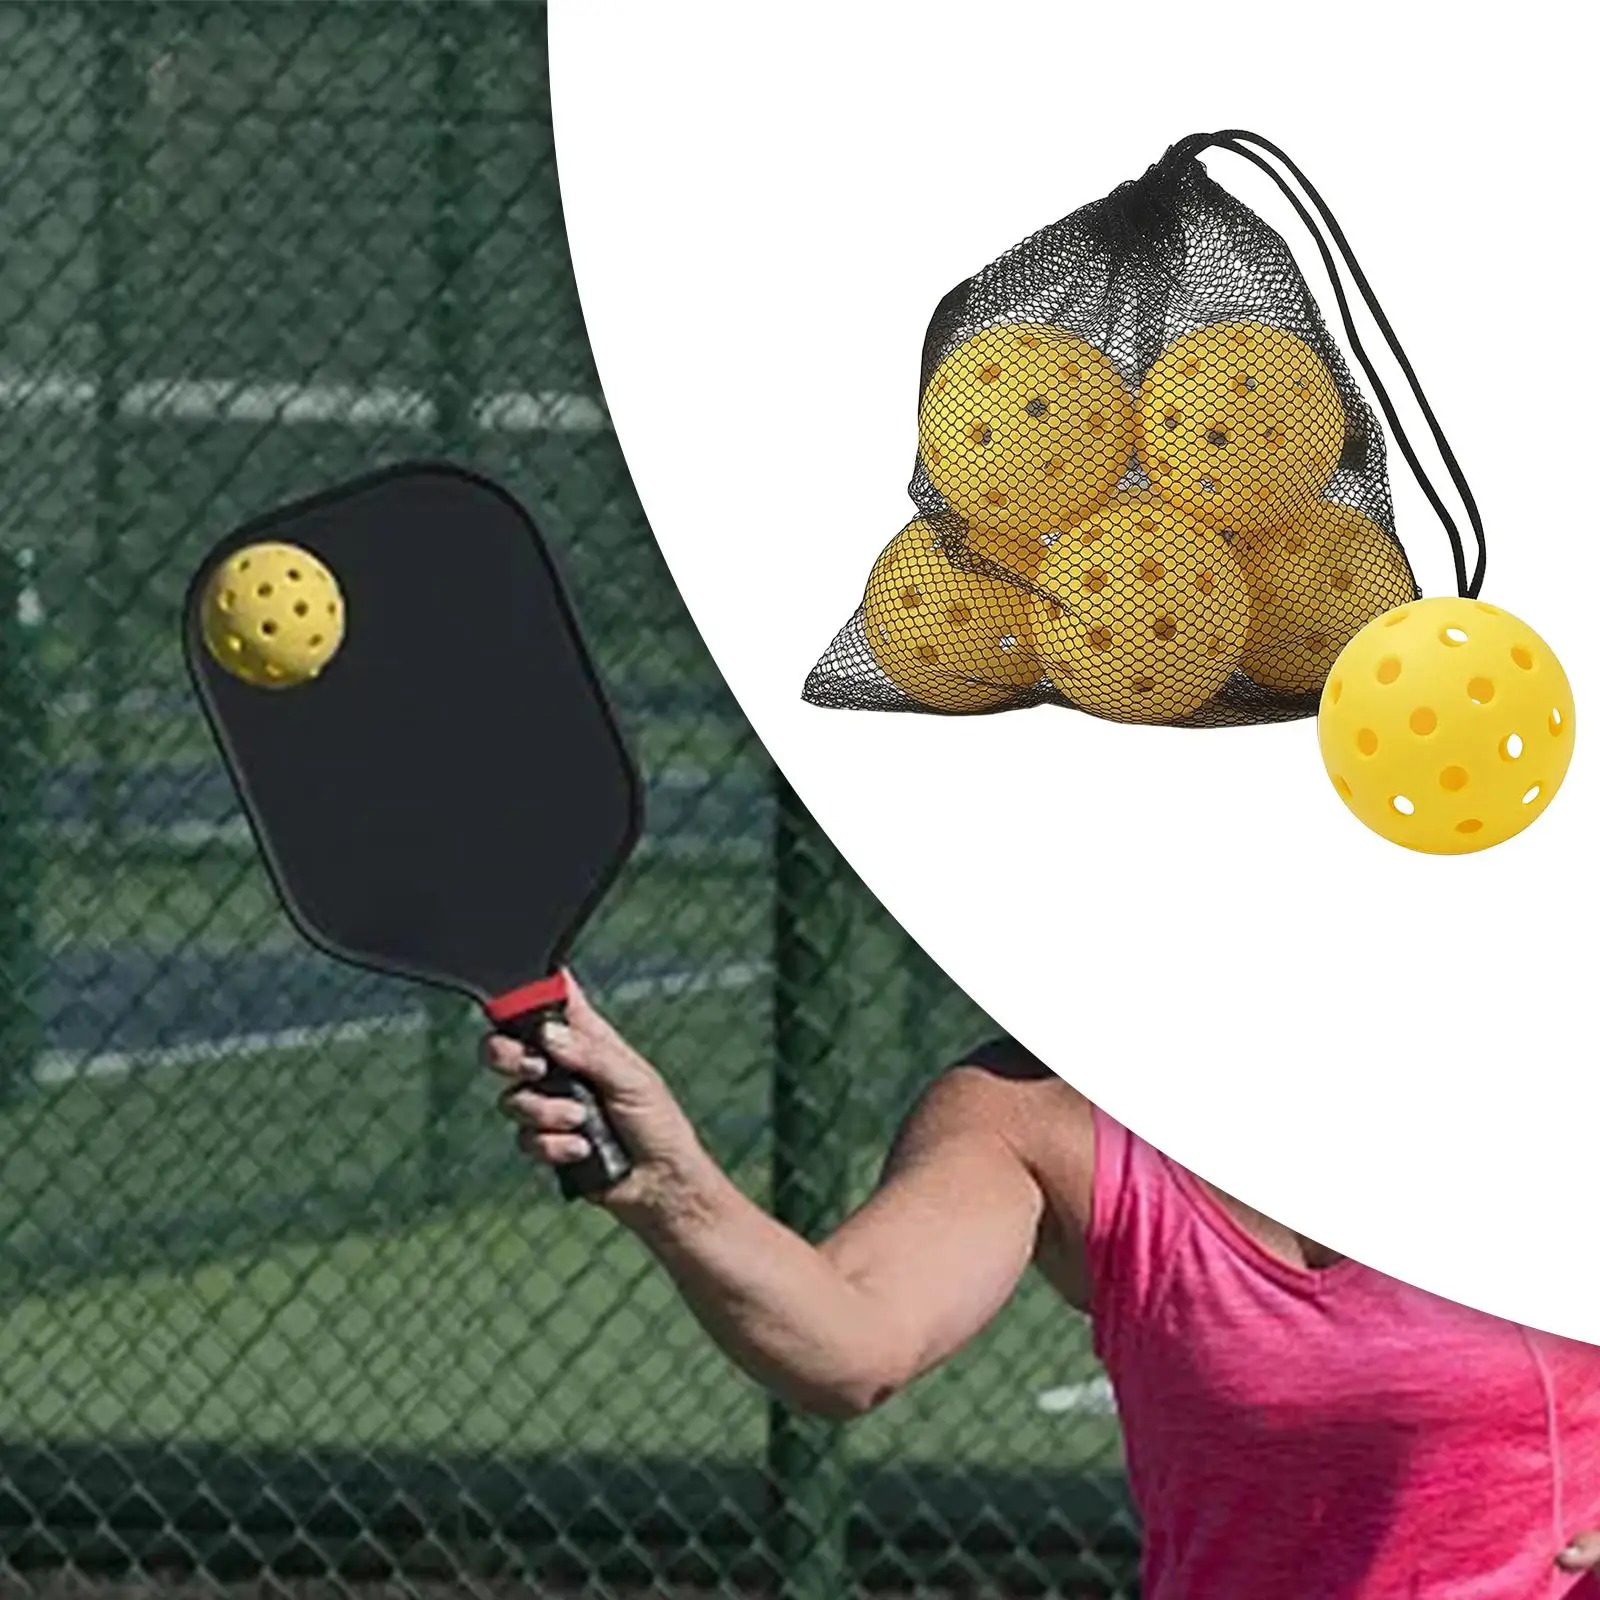 6 Pieces Pickleball Balls Standard Sports Pickle Balls with Mesh Bag for Training Sports Professional Perfomance Tournament Play